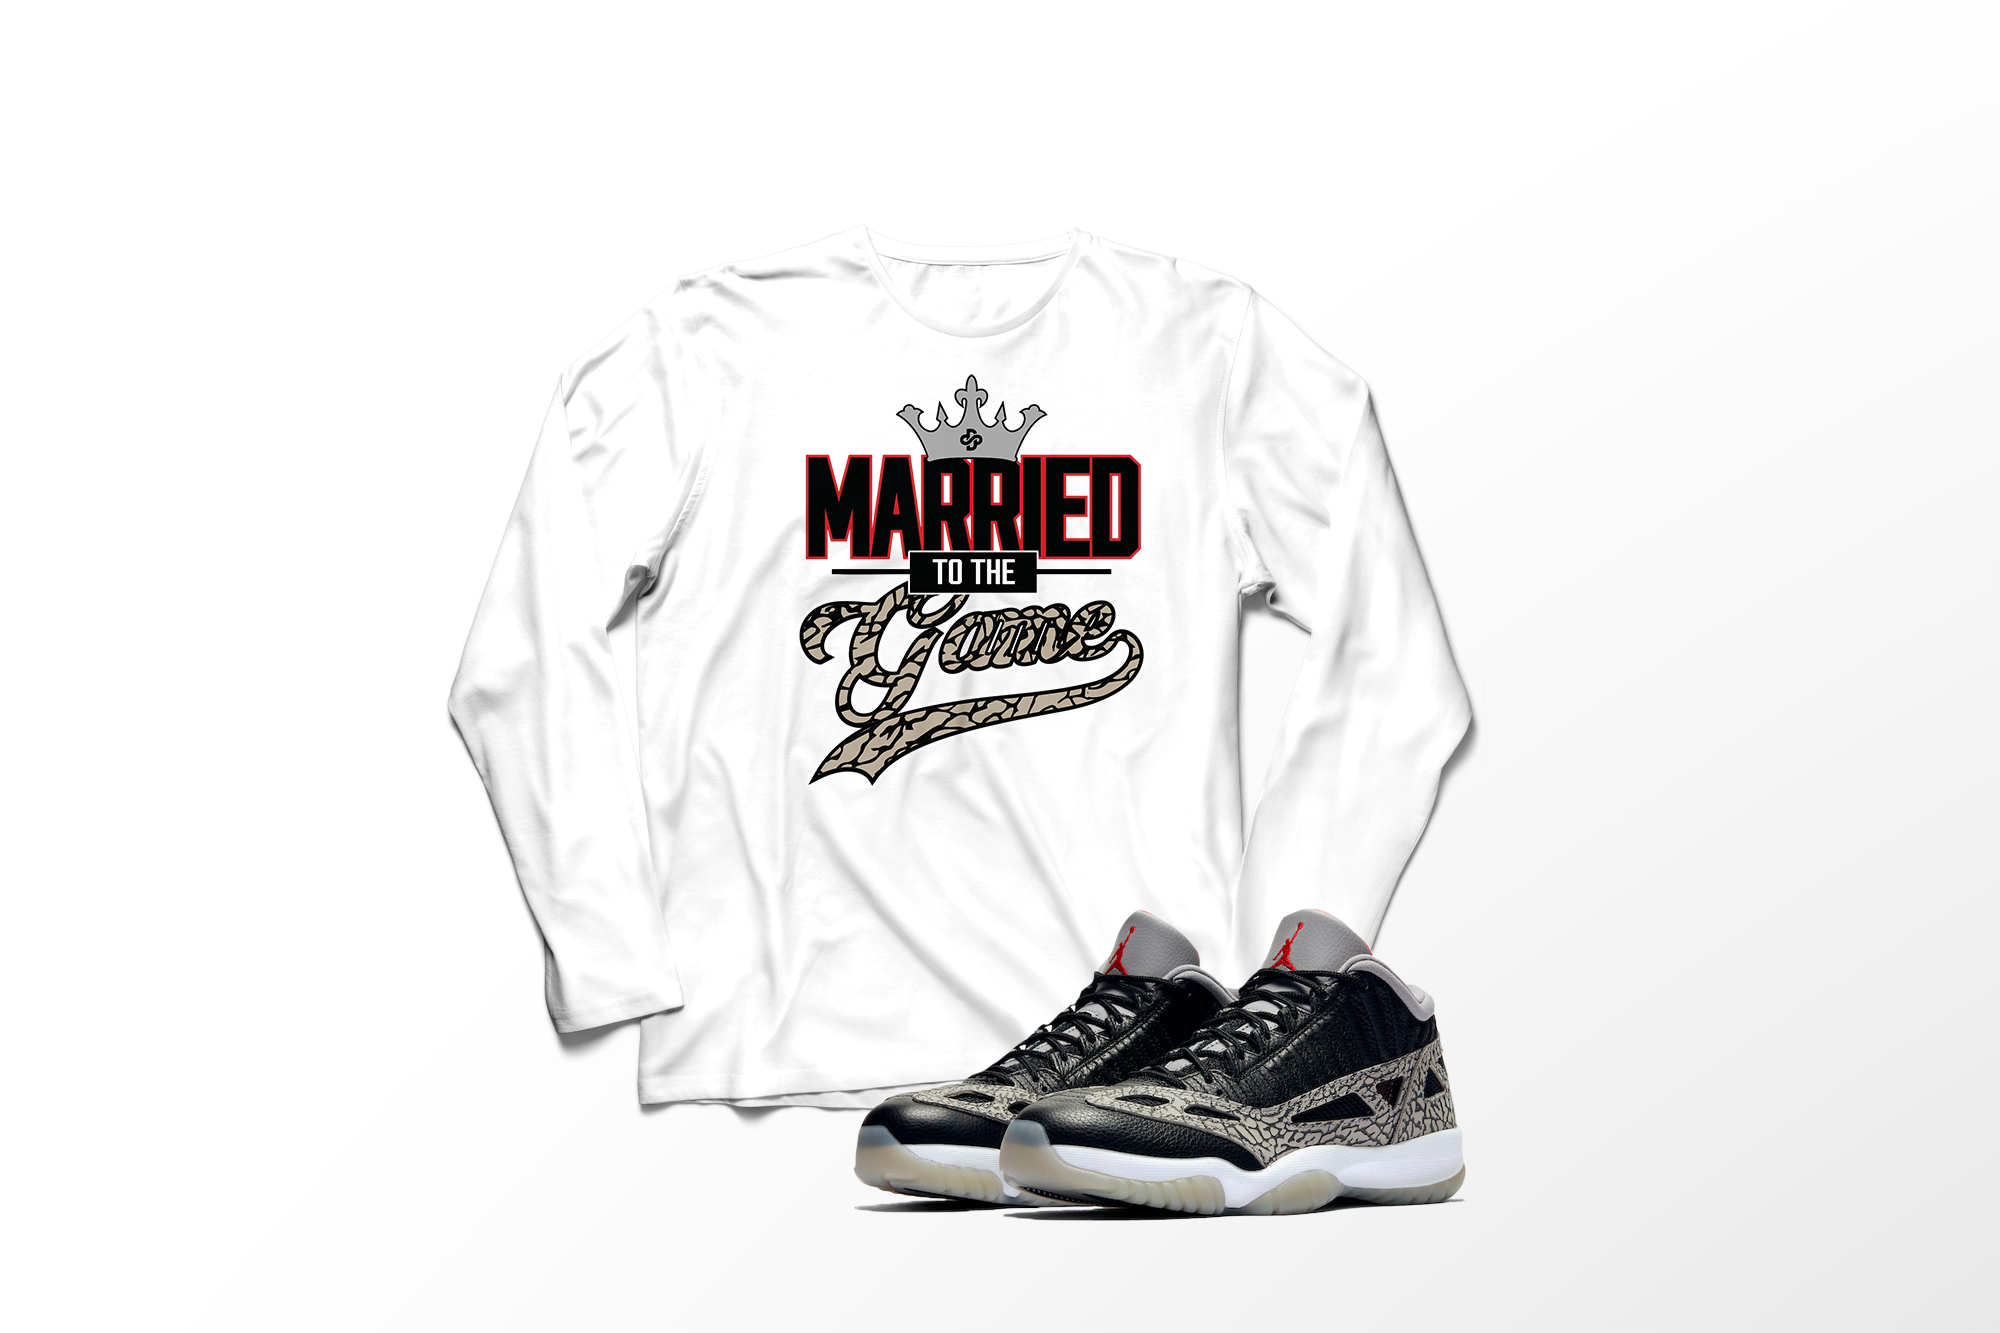 'Married To The Game' in Black Cement CW Men's Comfort Long Sleeve